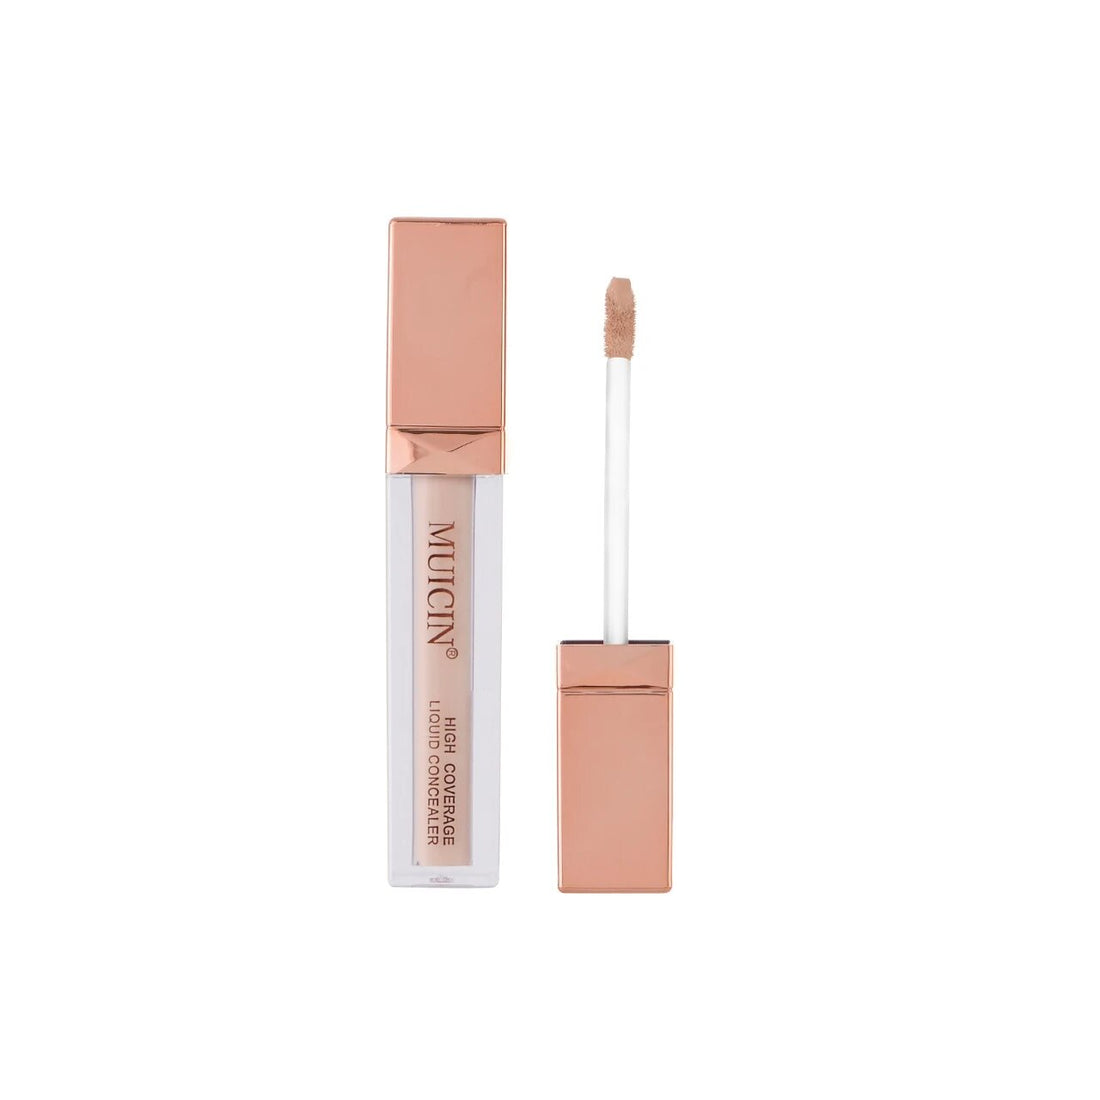 Gold Hd Coverage Liquid Concealer - 6G Classic Ivory